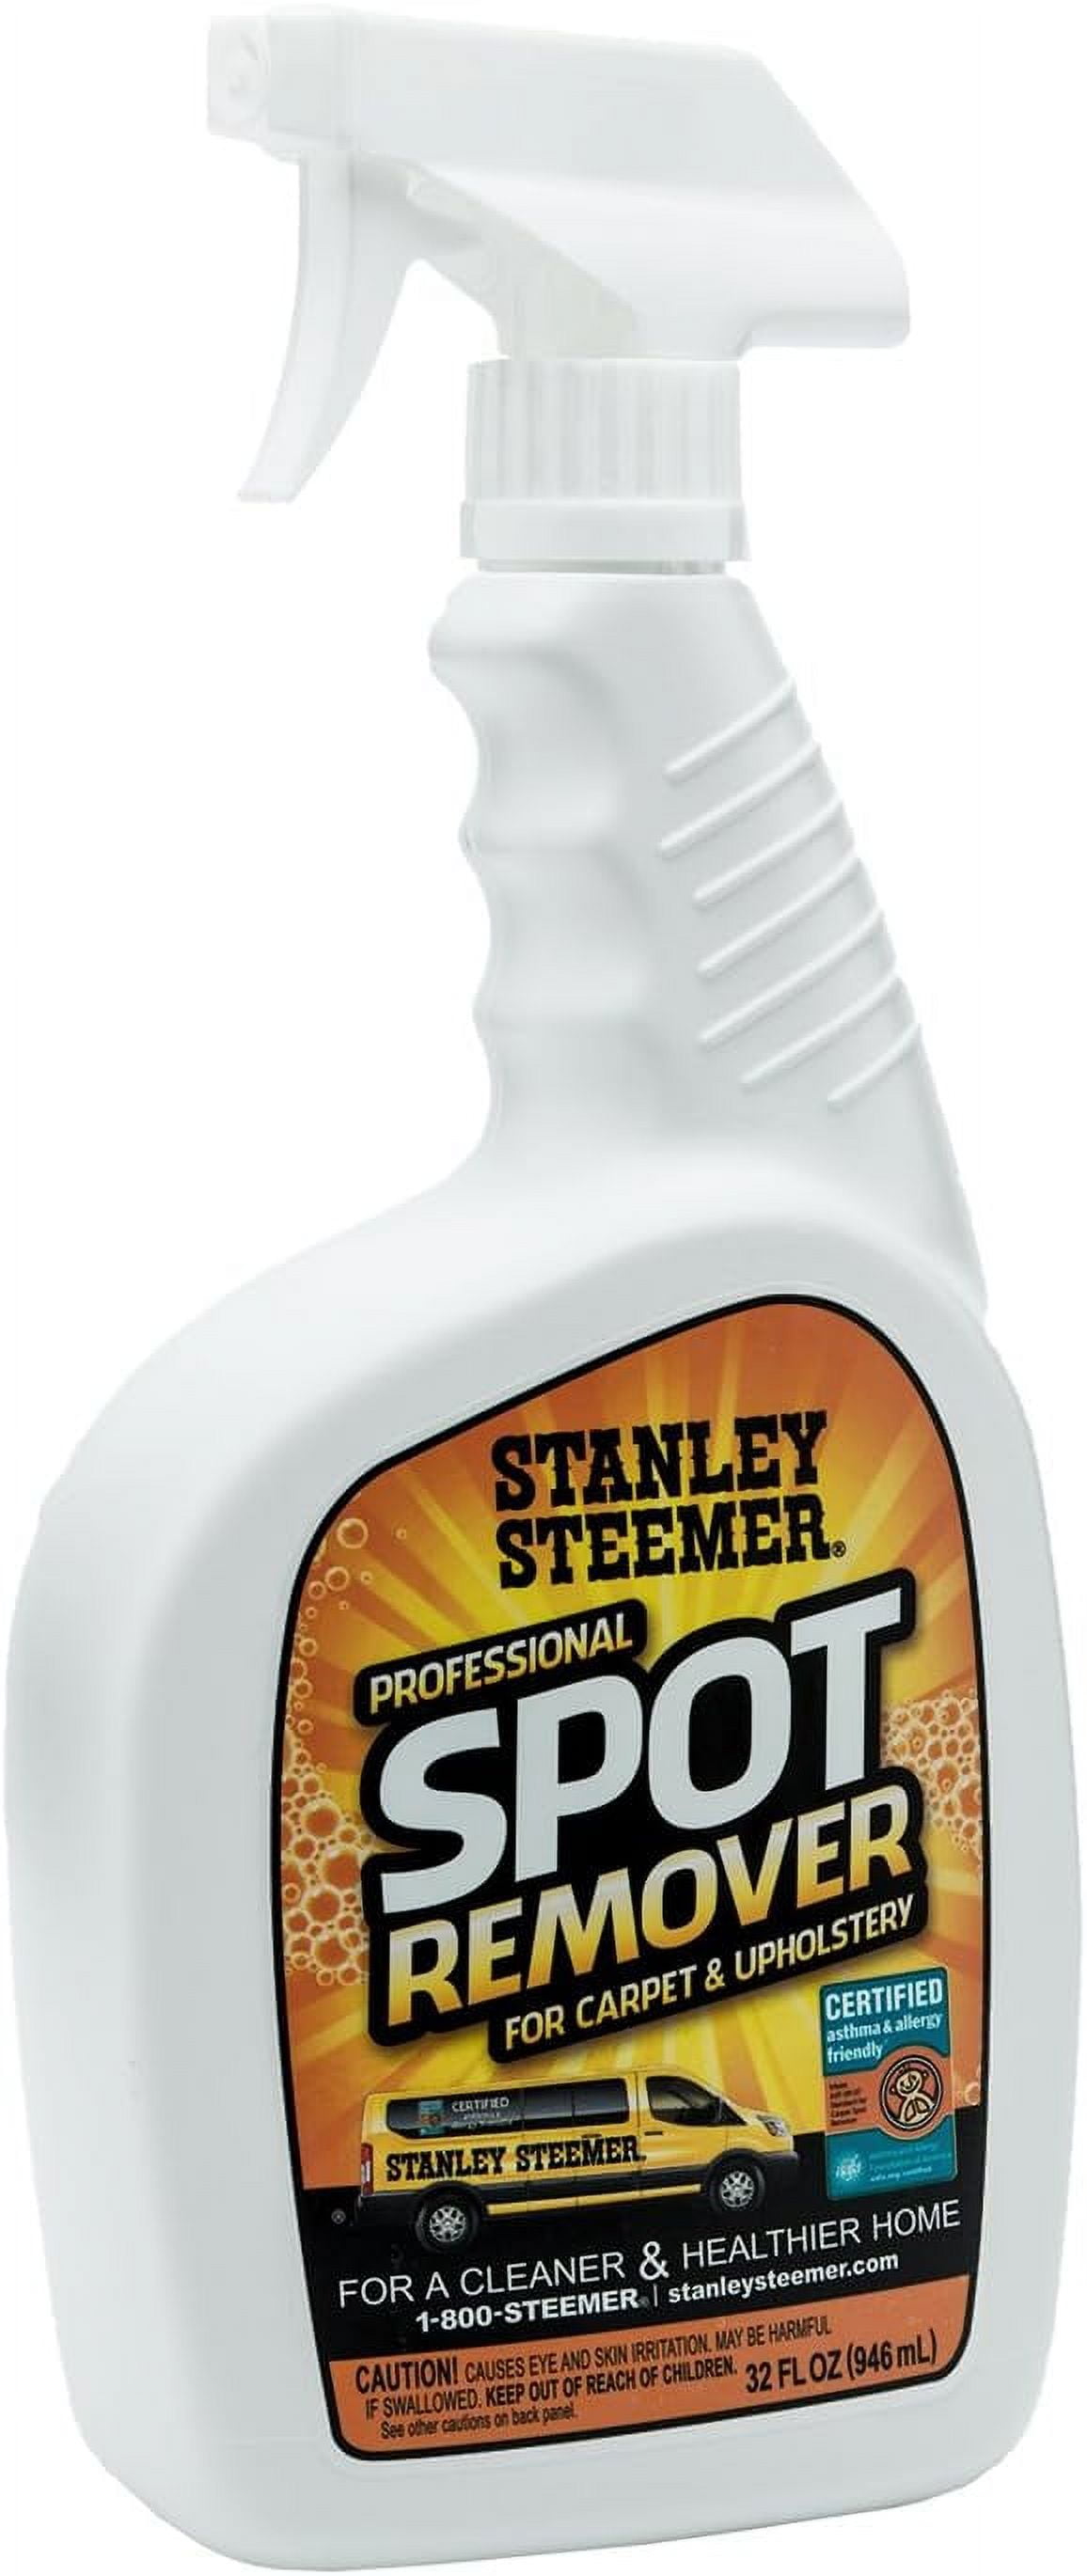 Stanley Steemer Professional Carpet And Upholstery Spot Remover 32oz Com